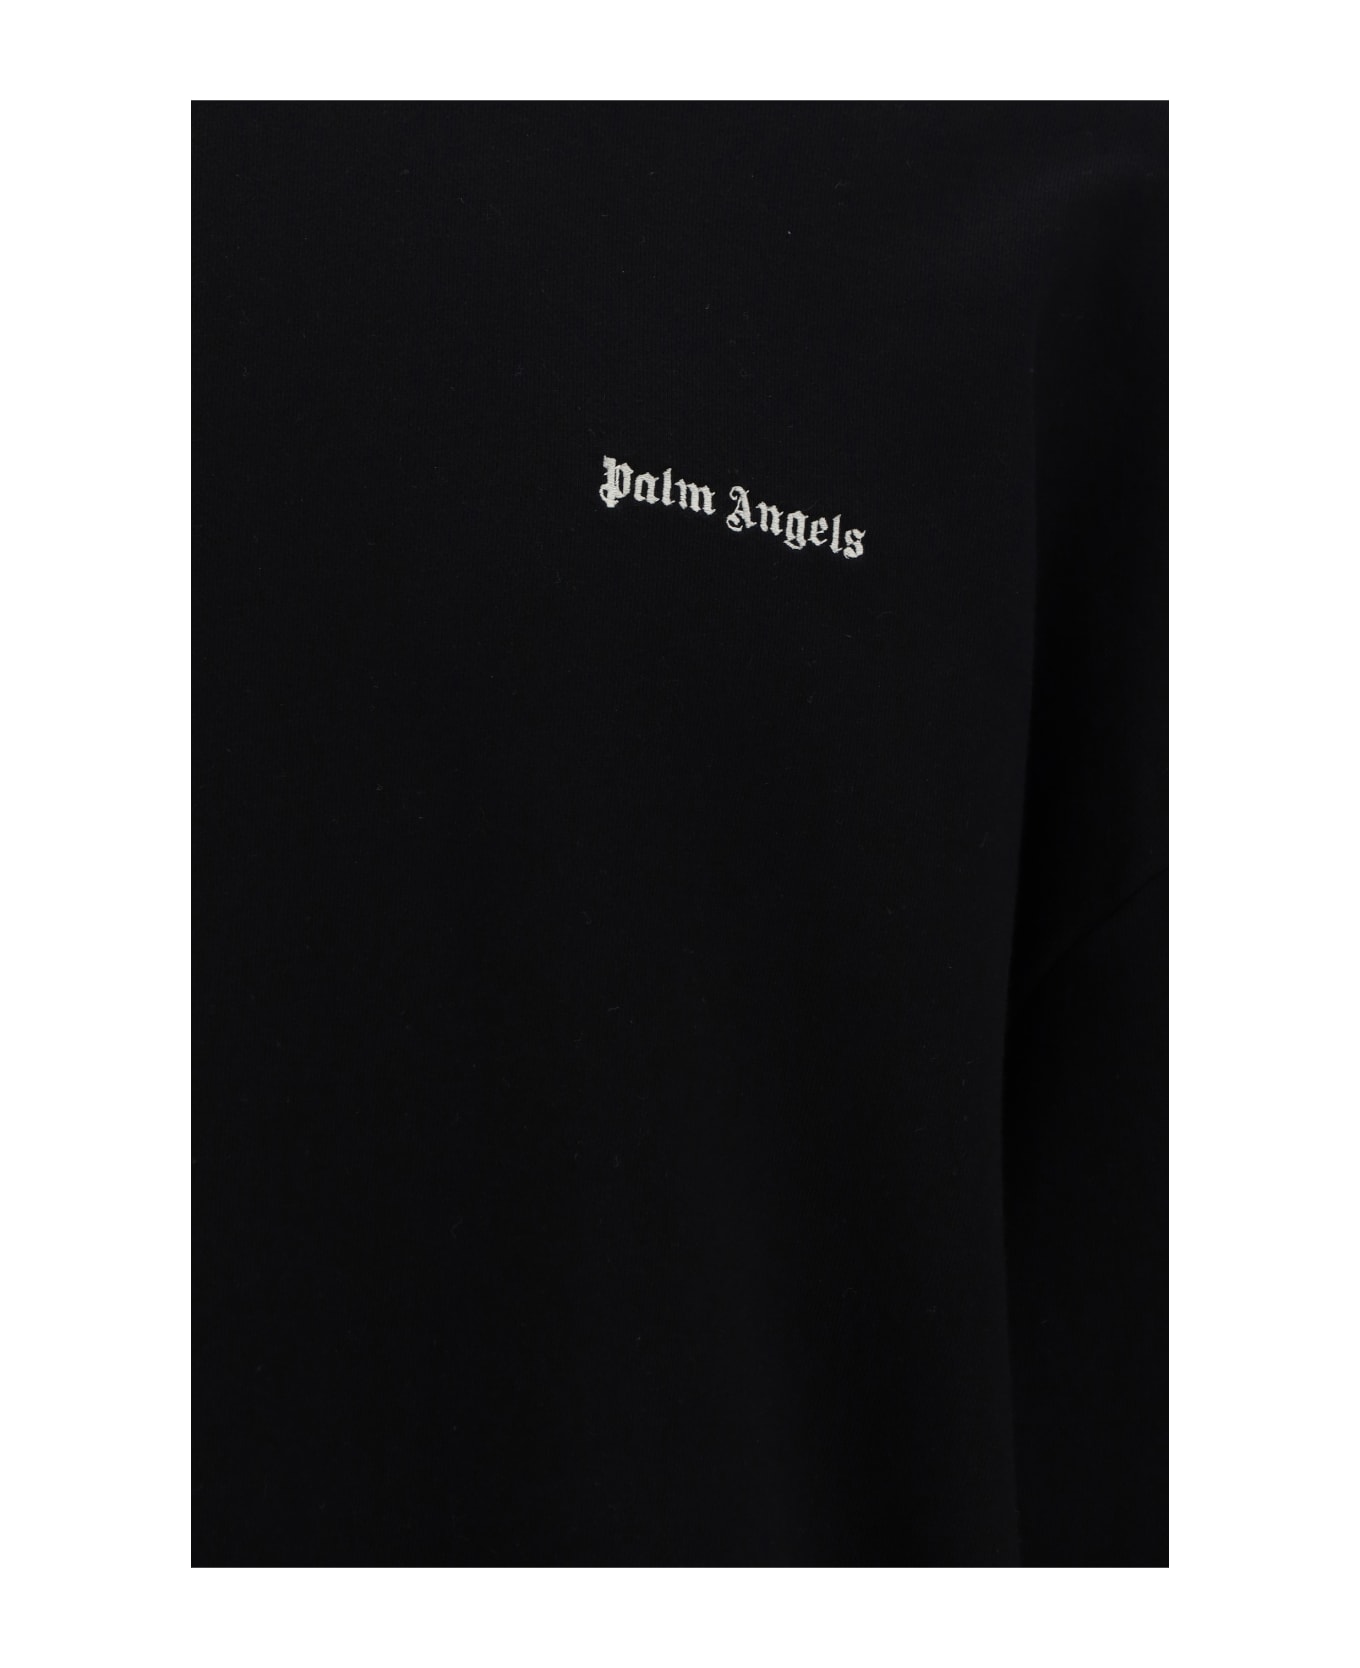 Palm Angels Black Sweatshirt With Front And Back Logo - Black Off White